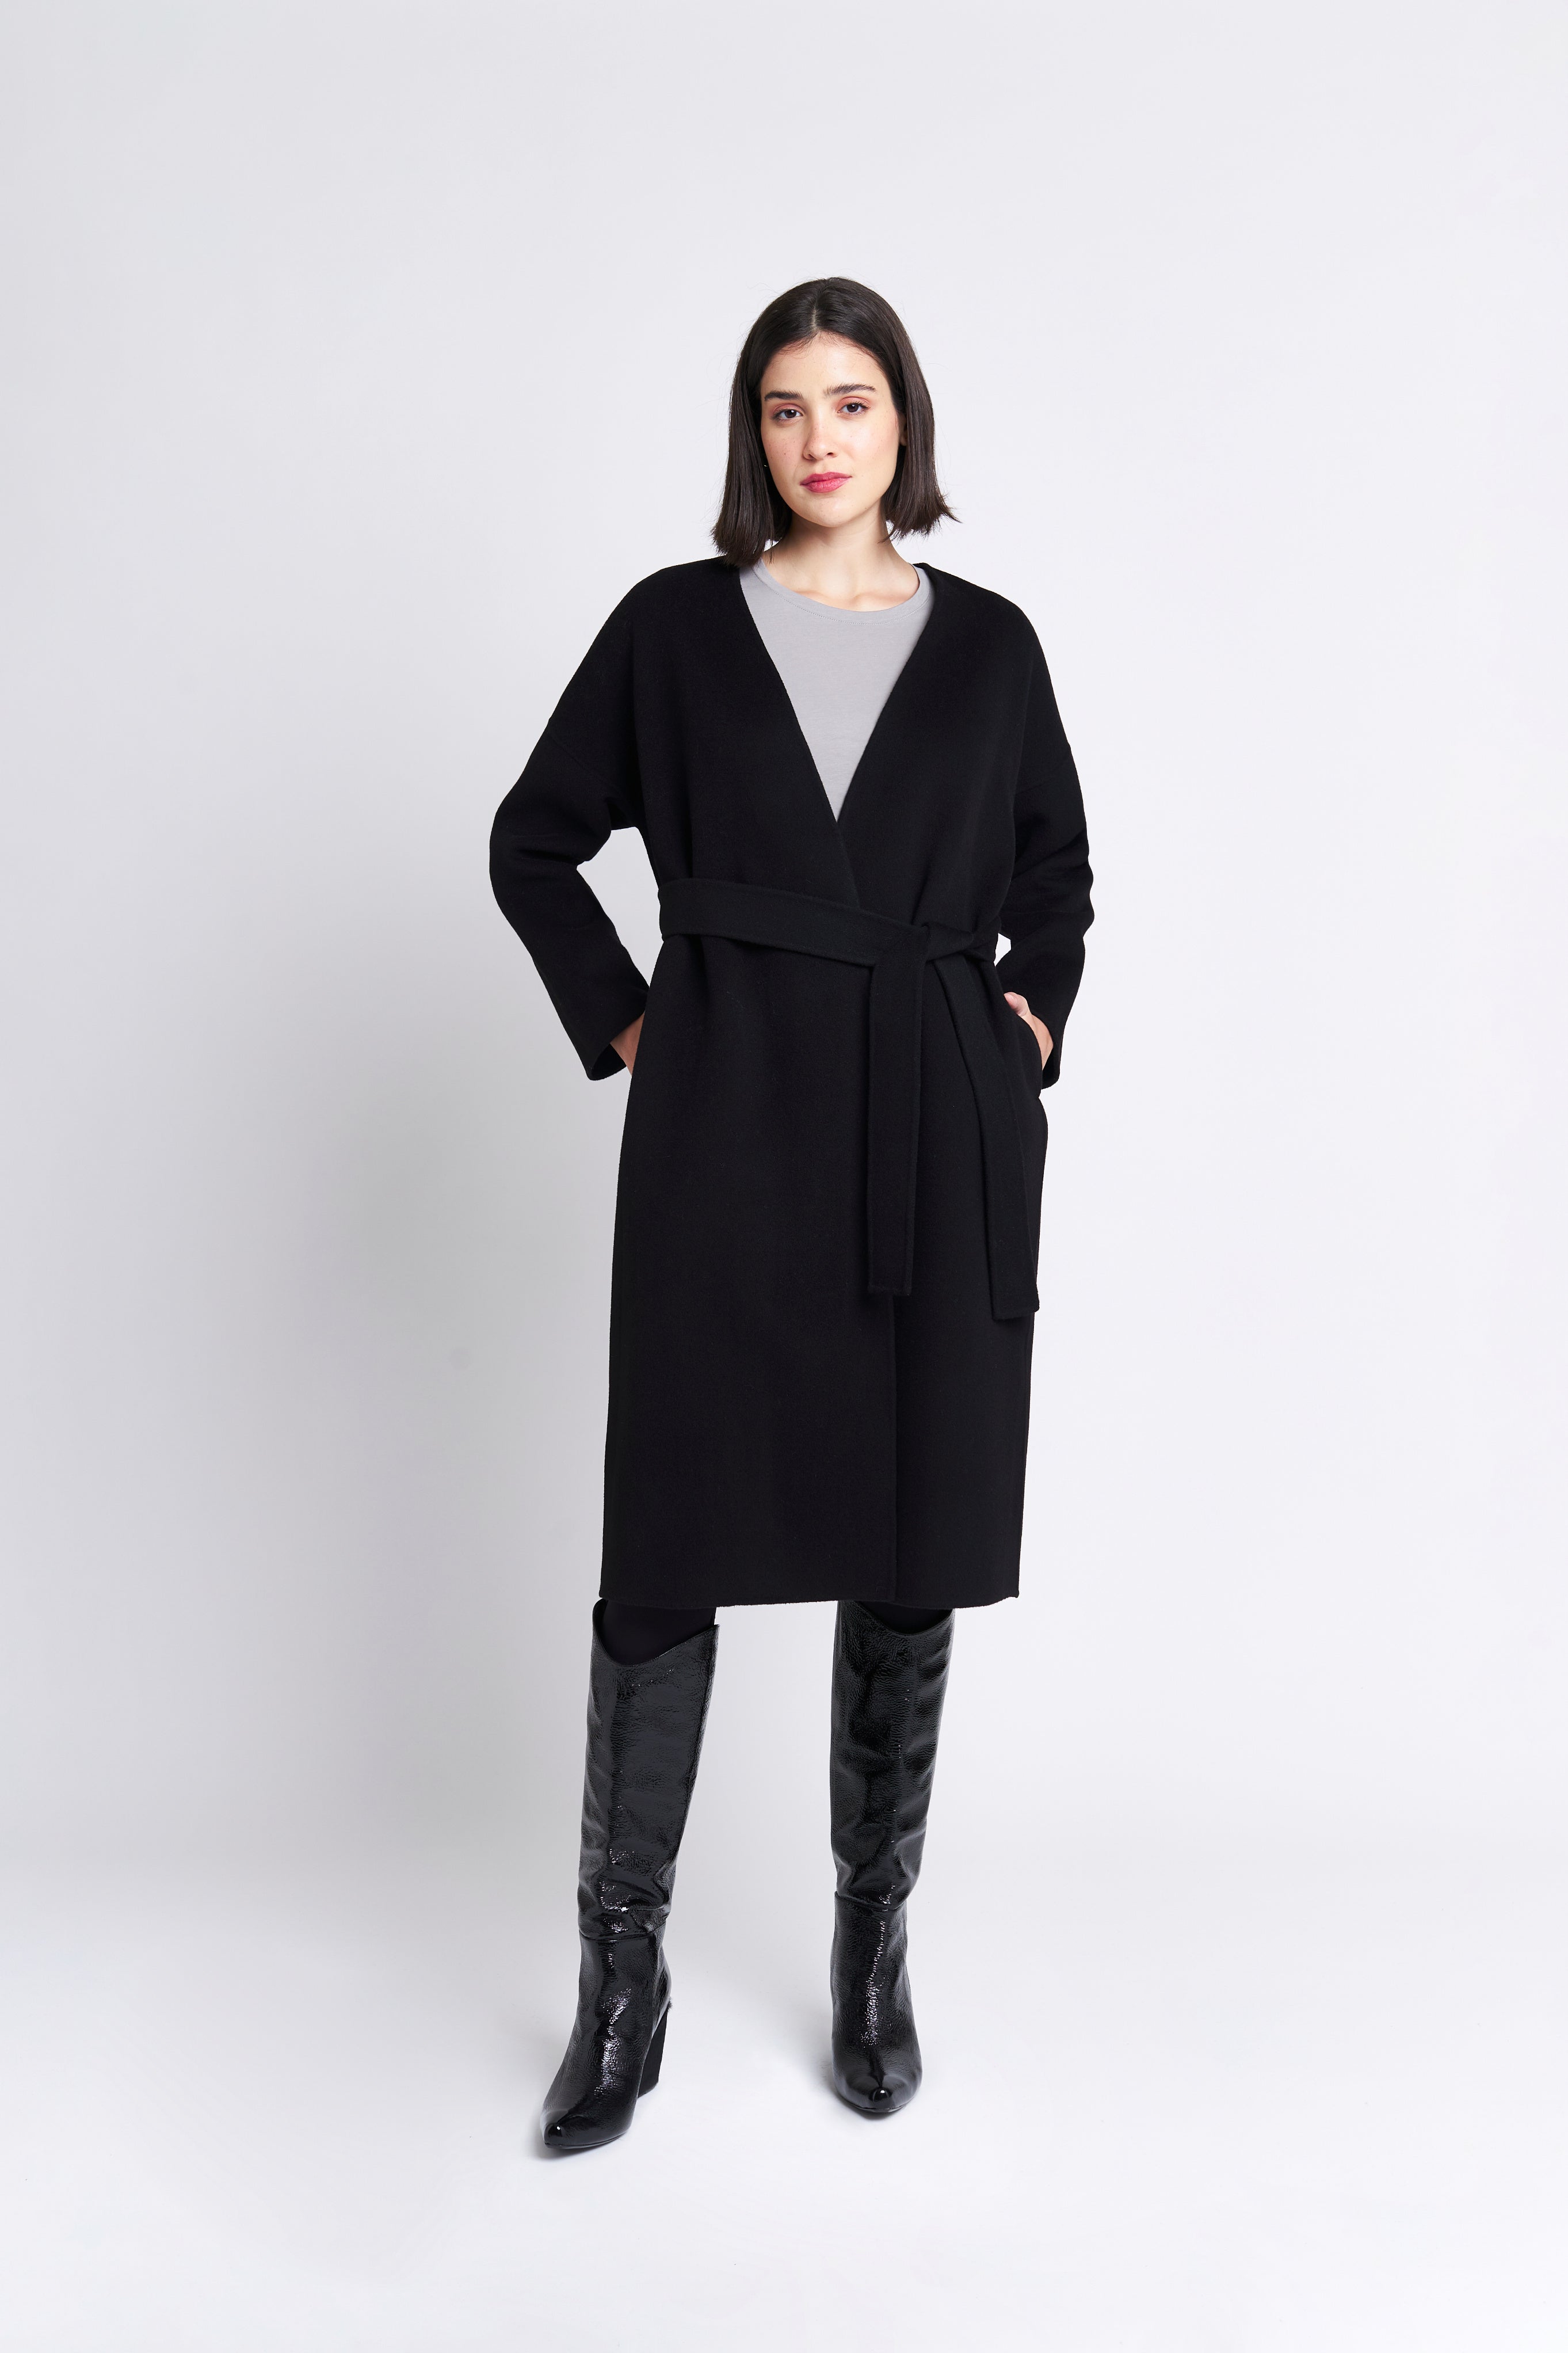 PHILOSOPHER WOOL & CASHMERE BELTED COAT